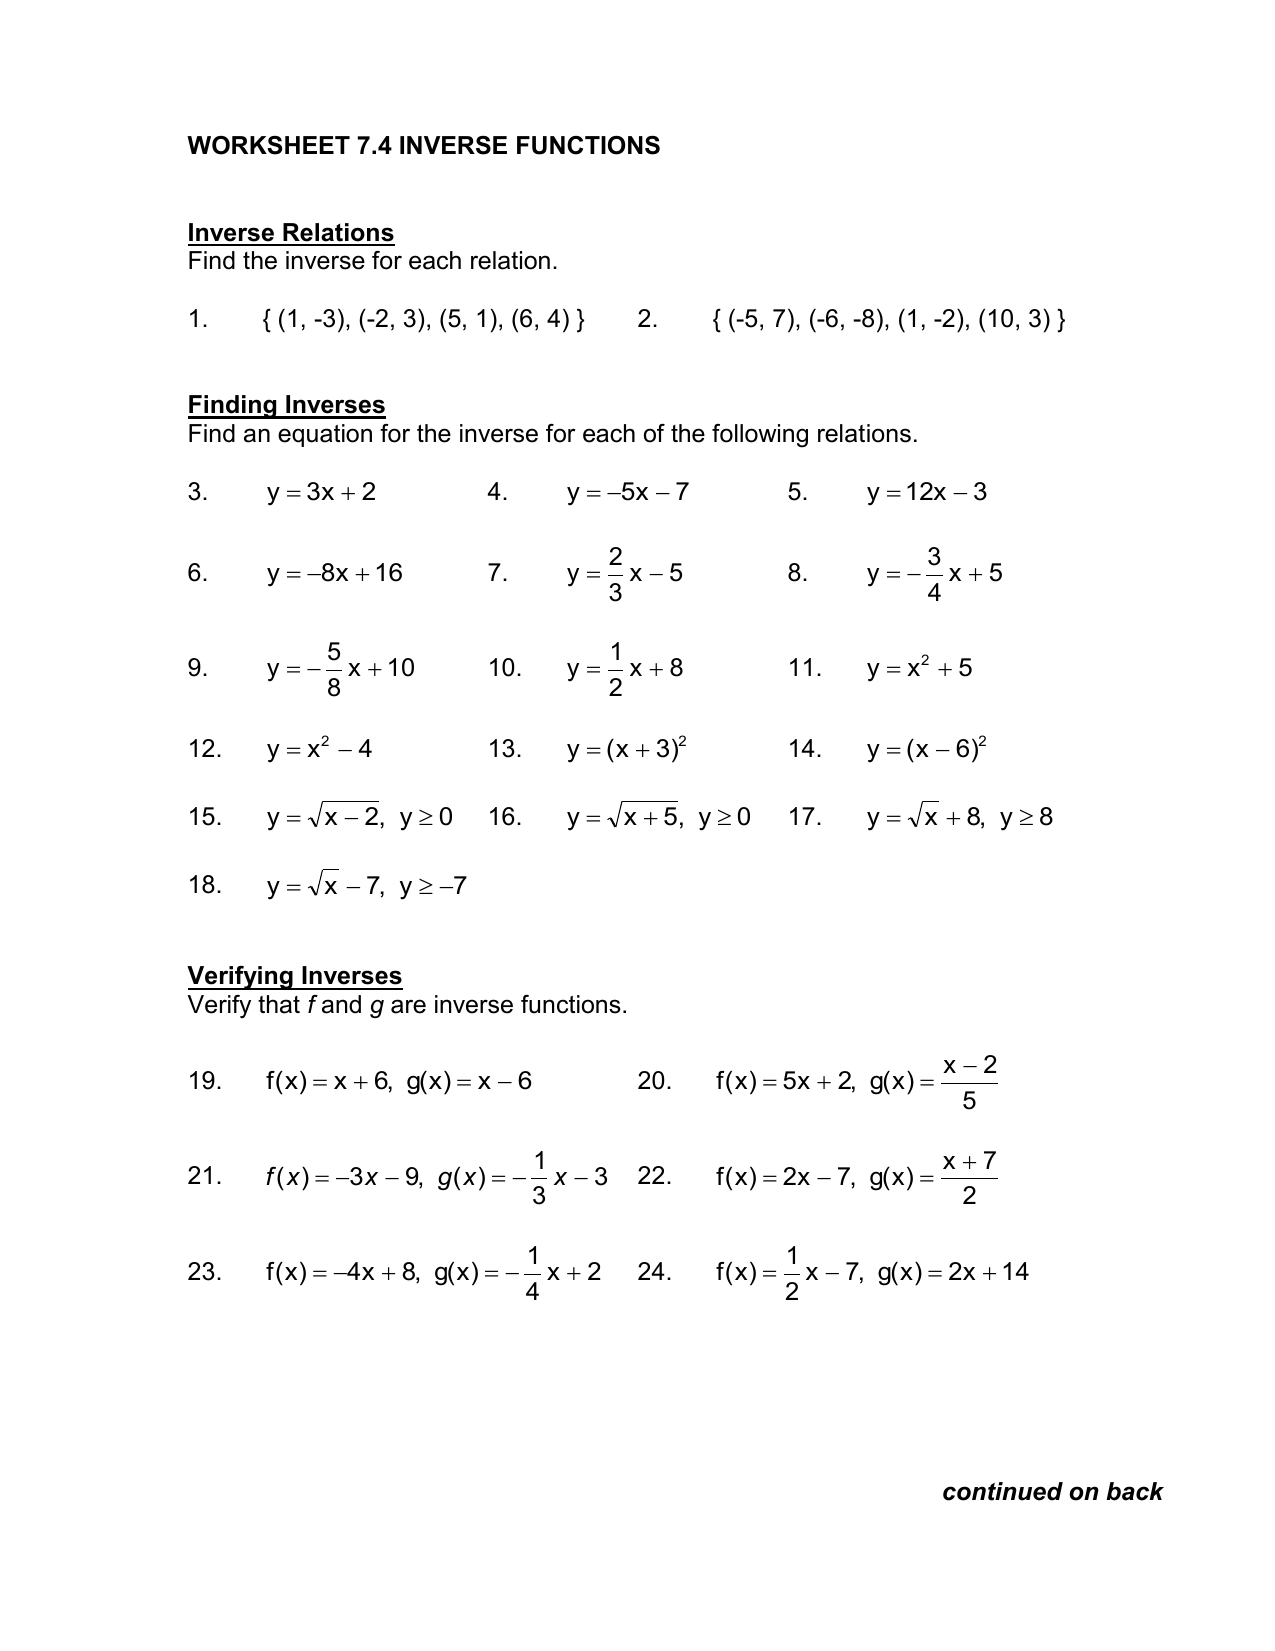 worksheet 11 11 inverse functions With Inverse Functions Worksheet With Answers